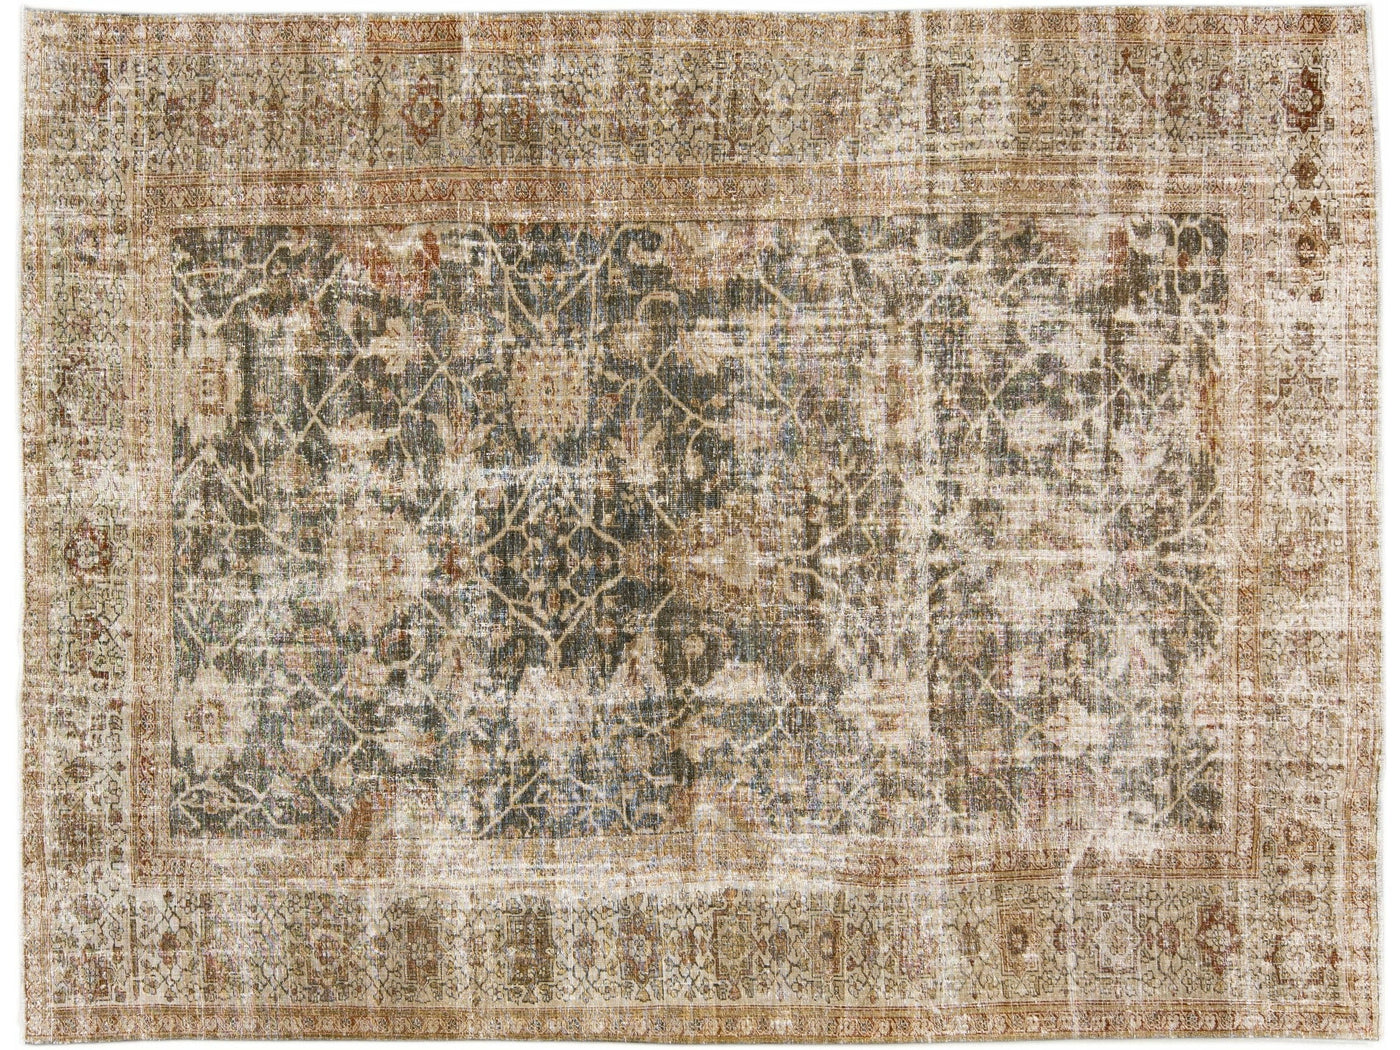 Antique Sultanabad Handmade Floral Blue and Brown Distressed Wool Rug